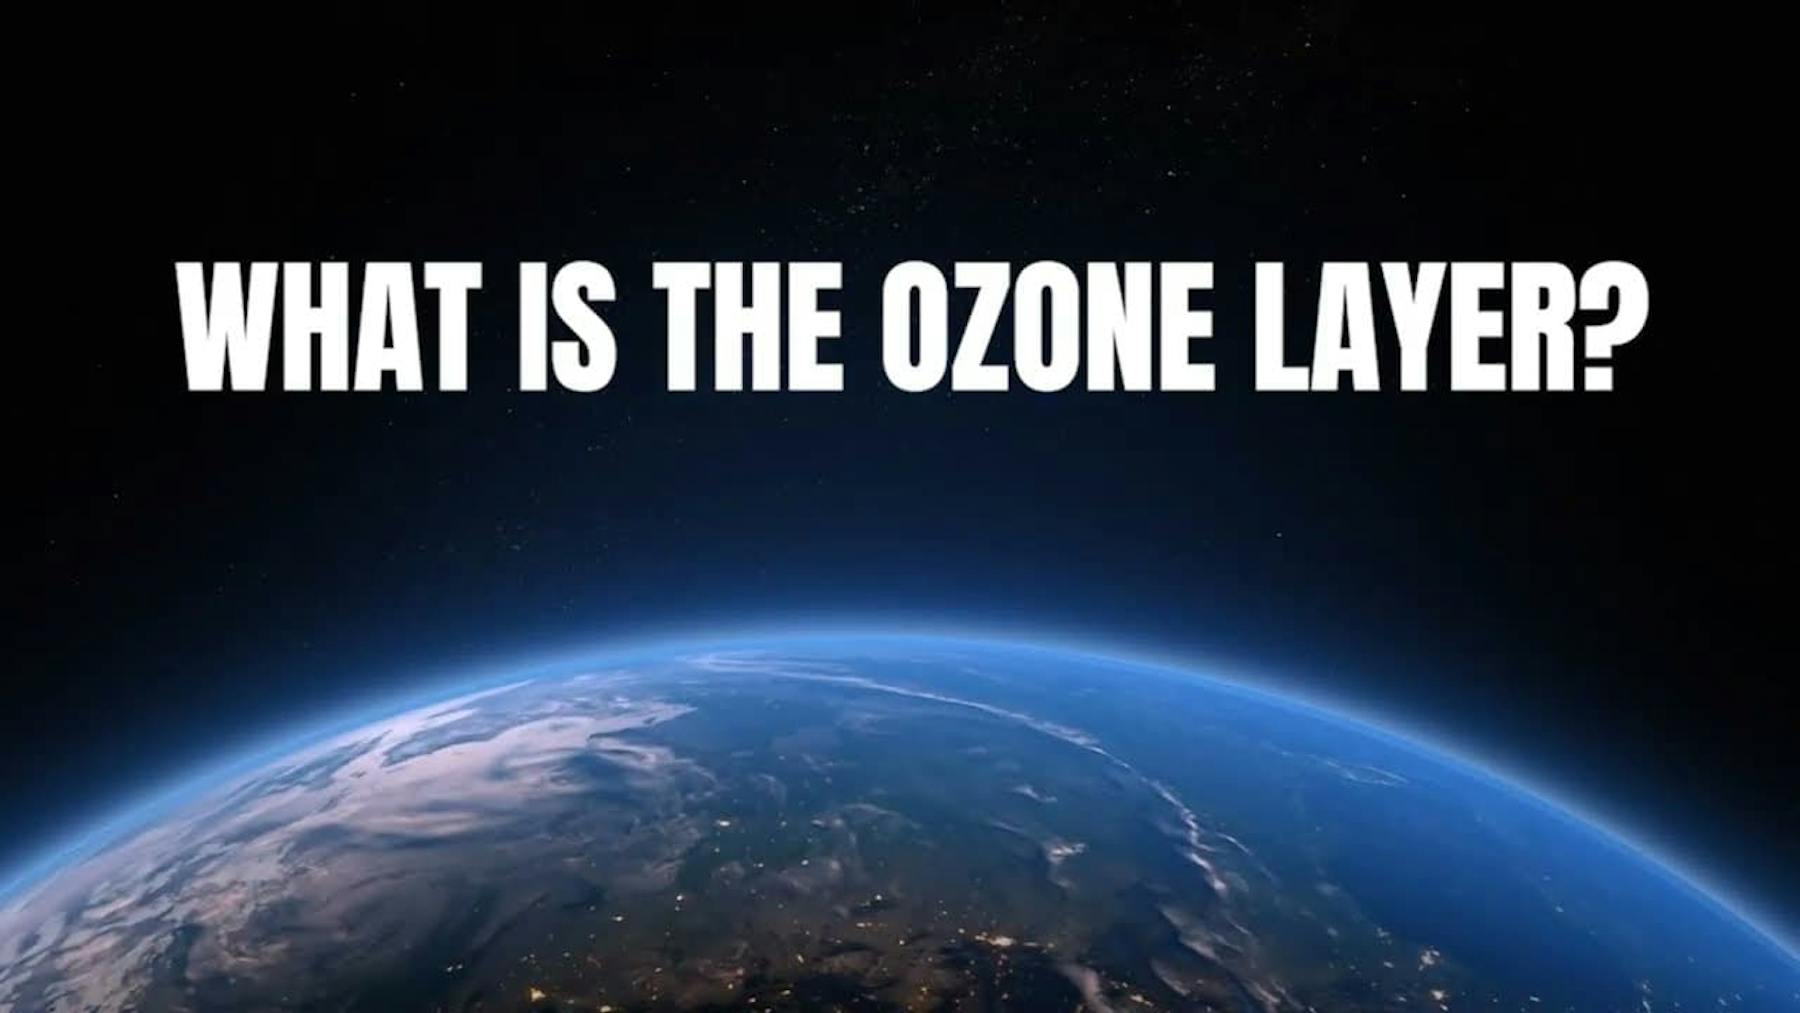 what is the ozone layer?